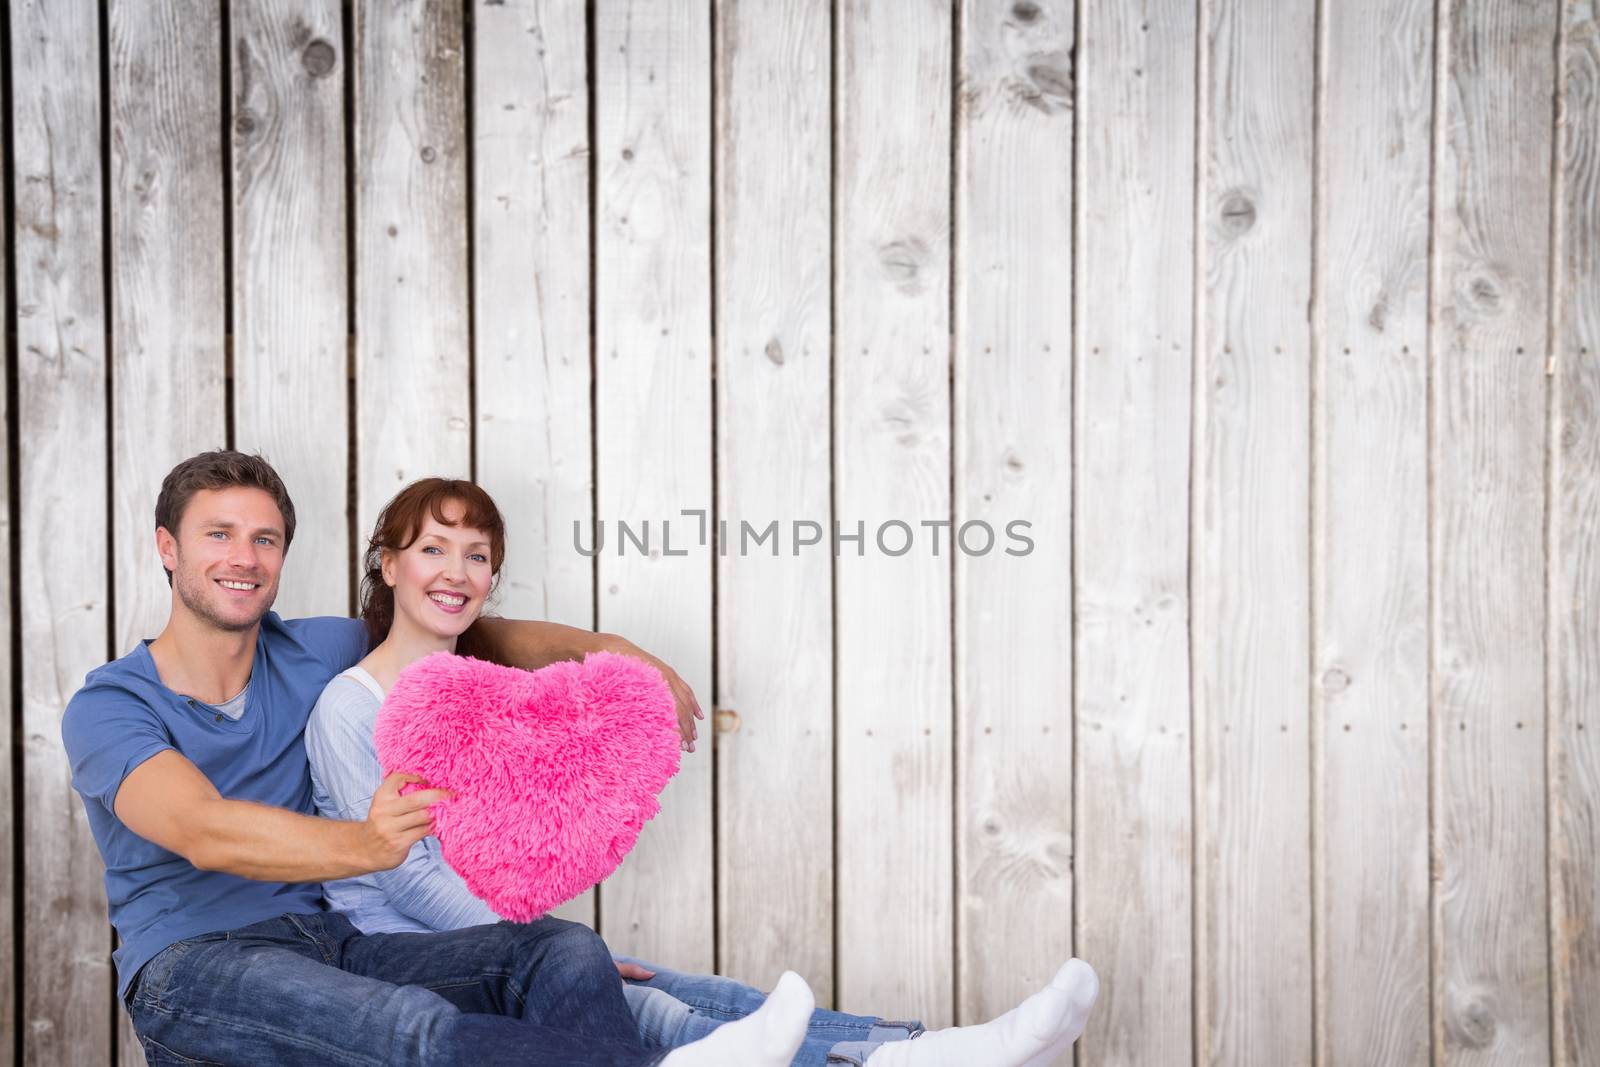 Couple holding a large heart against wooden planks